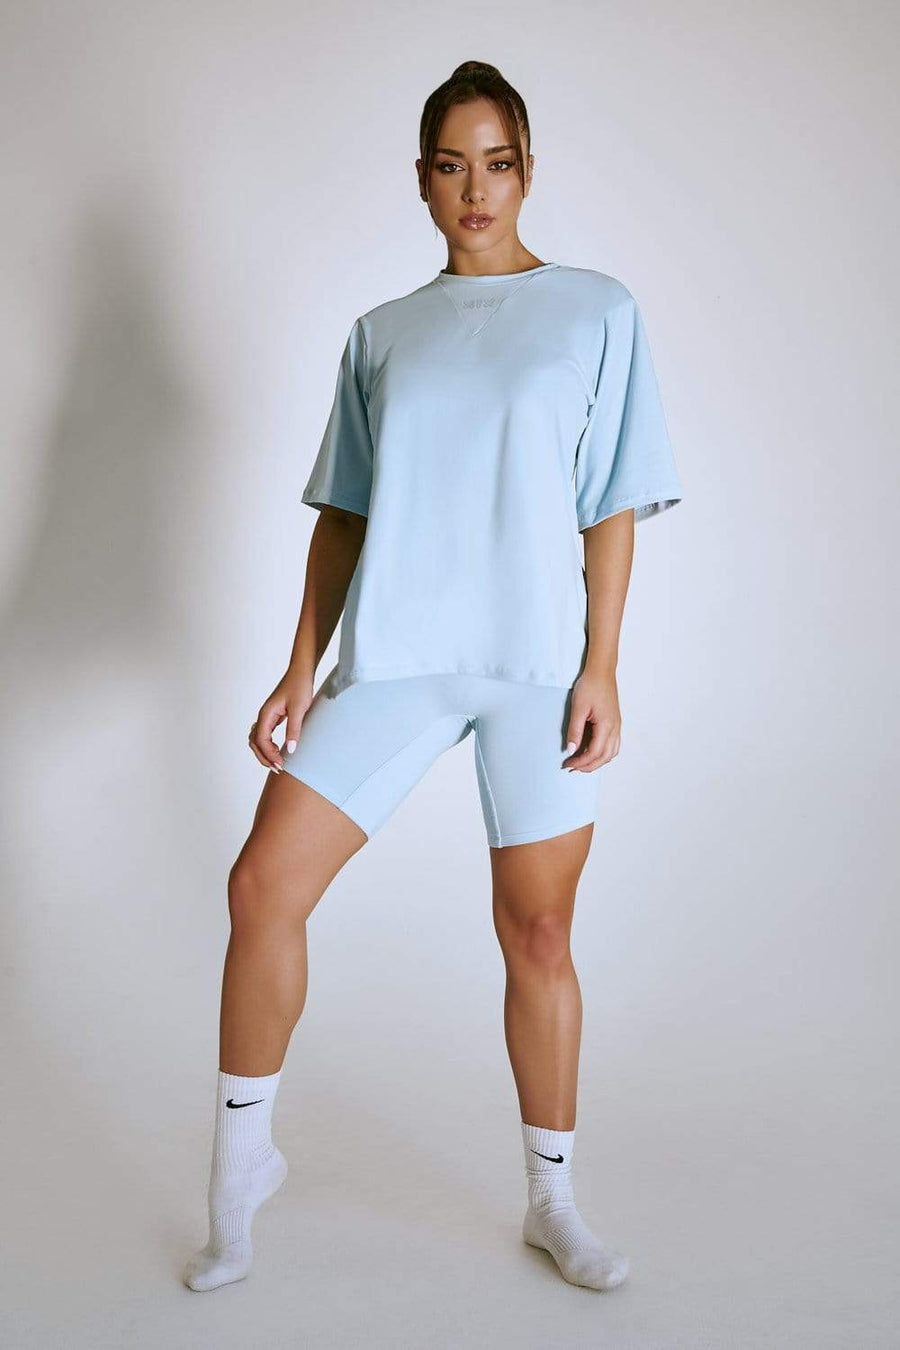 LuxLounge Oversized T-Shirt - Baby Blue Top